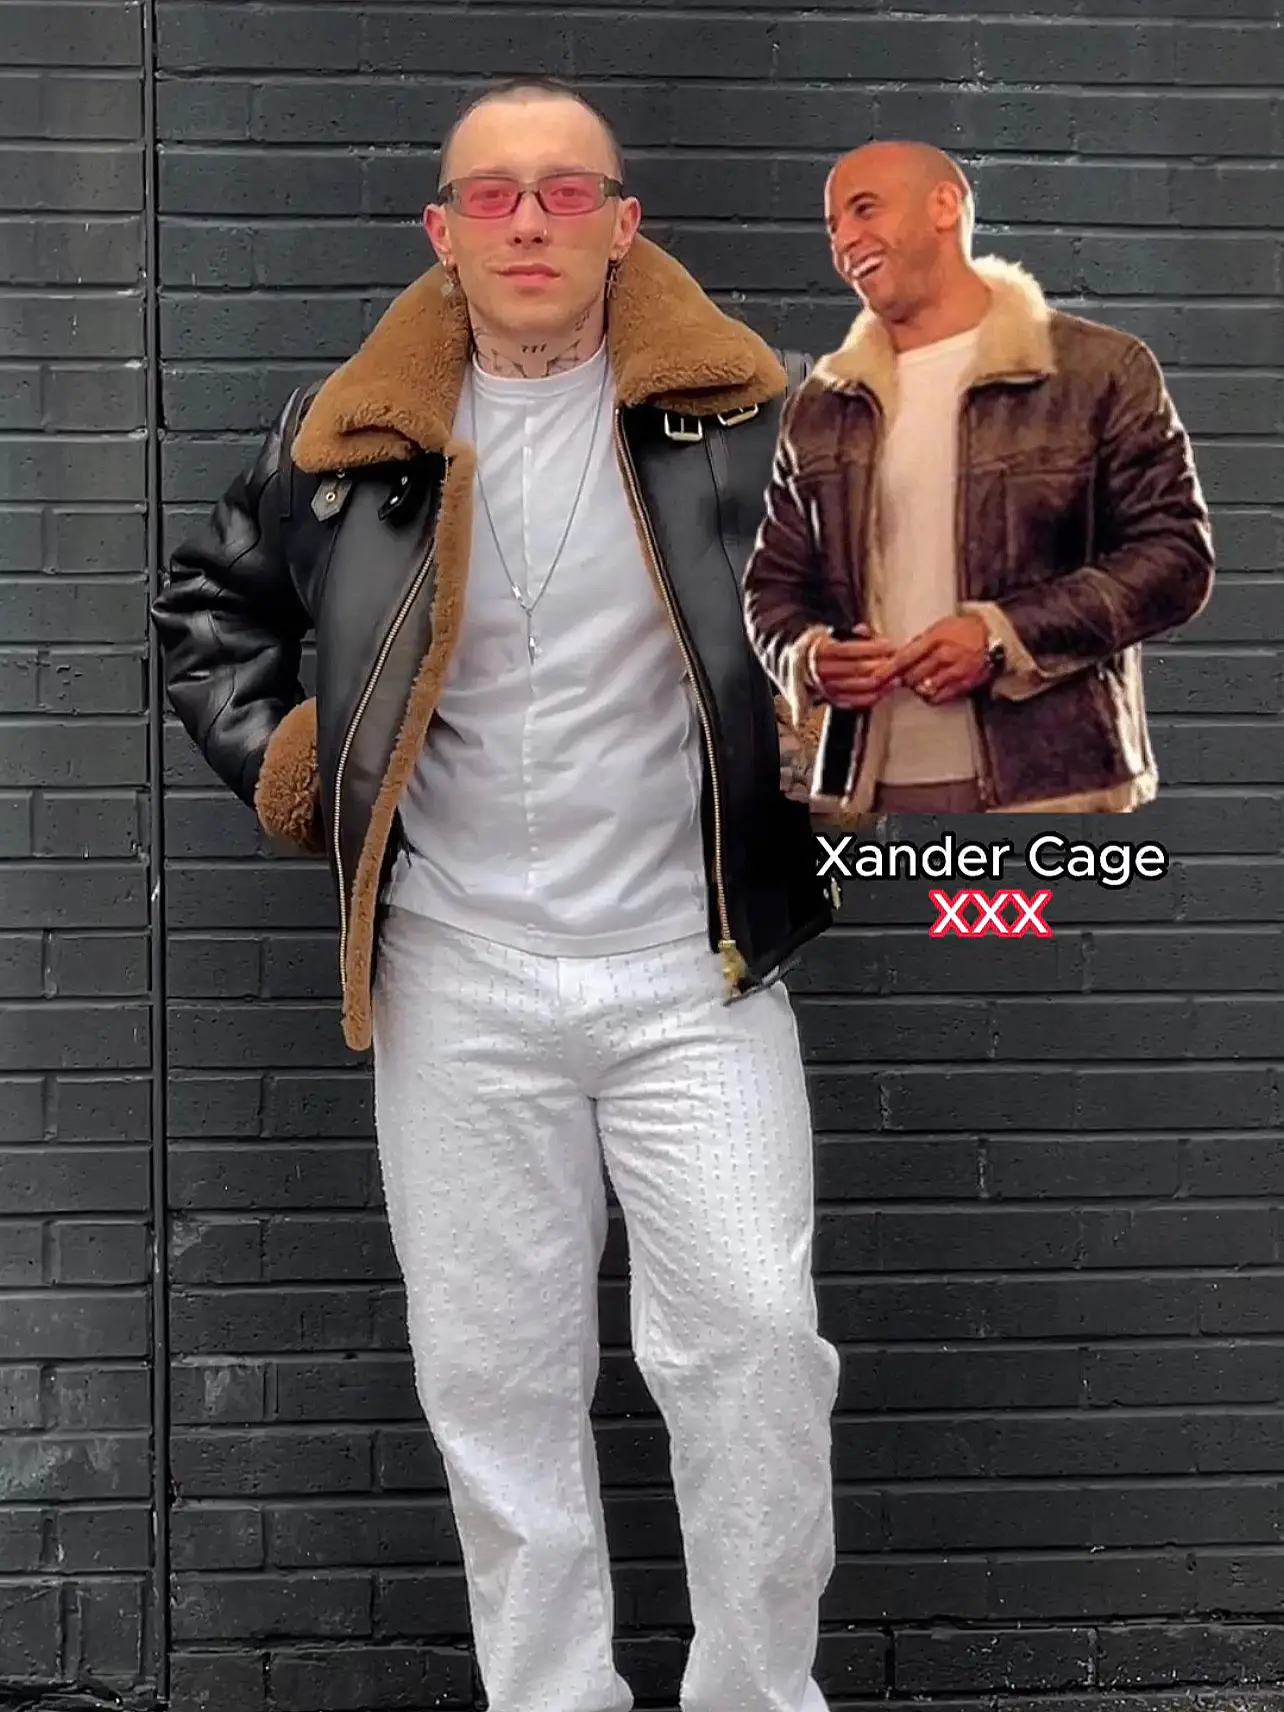 Outfits inspired by SAME Dont THE Gallery by JACKET Mike Be posted | Lemon8 